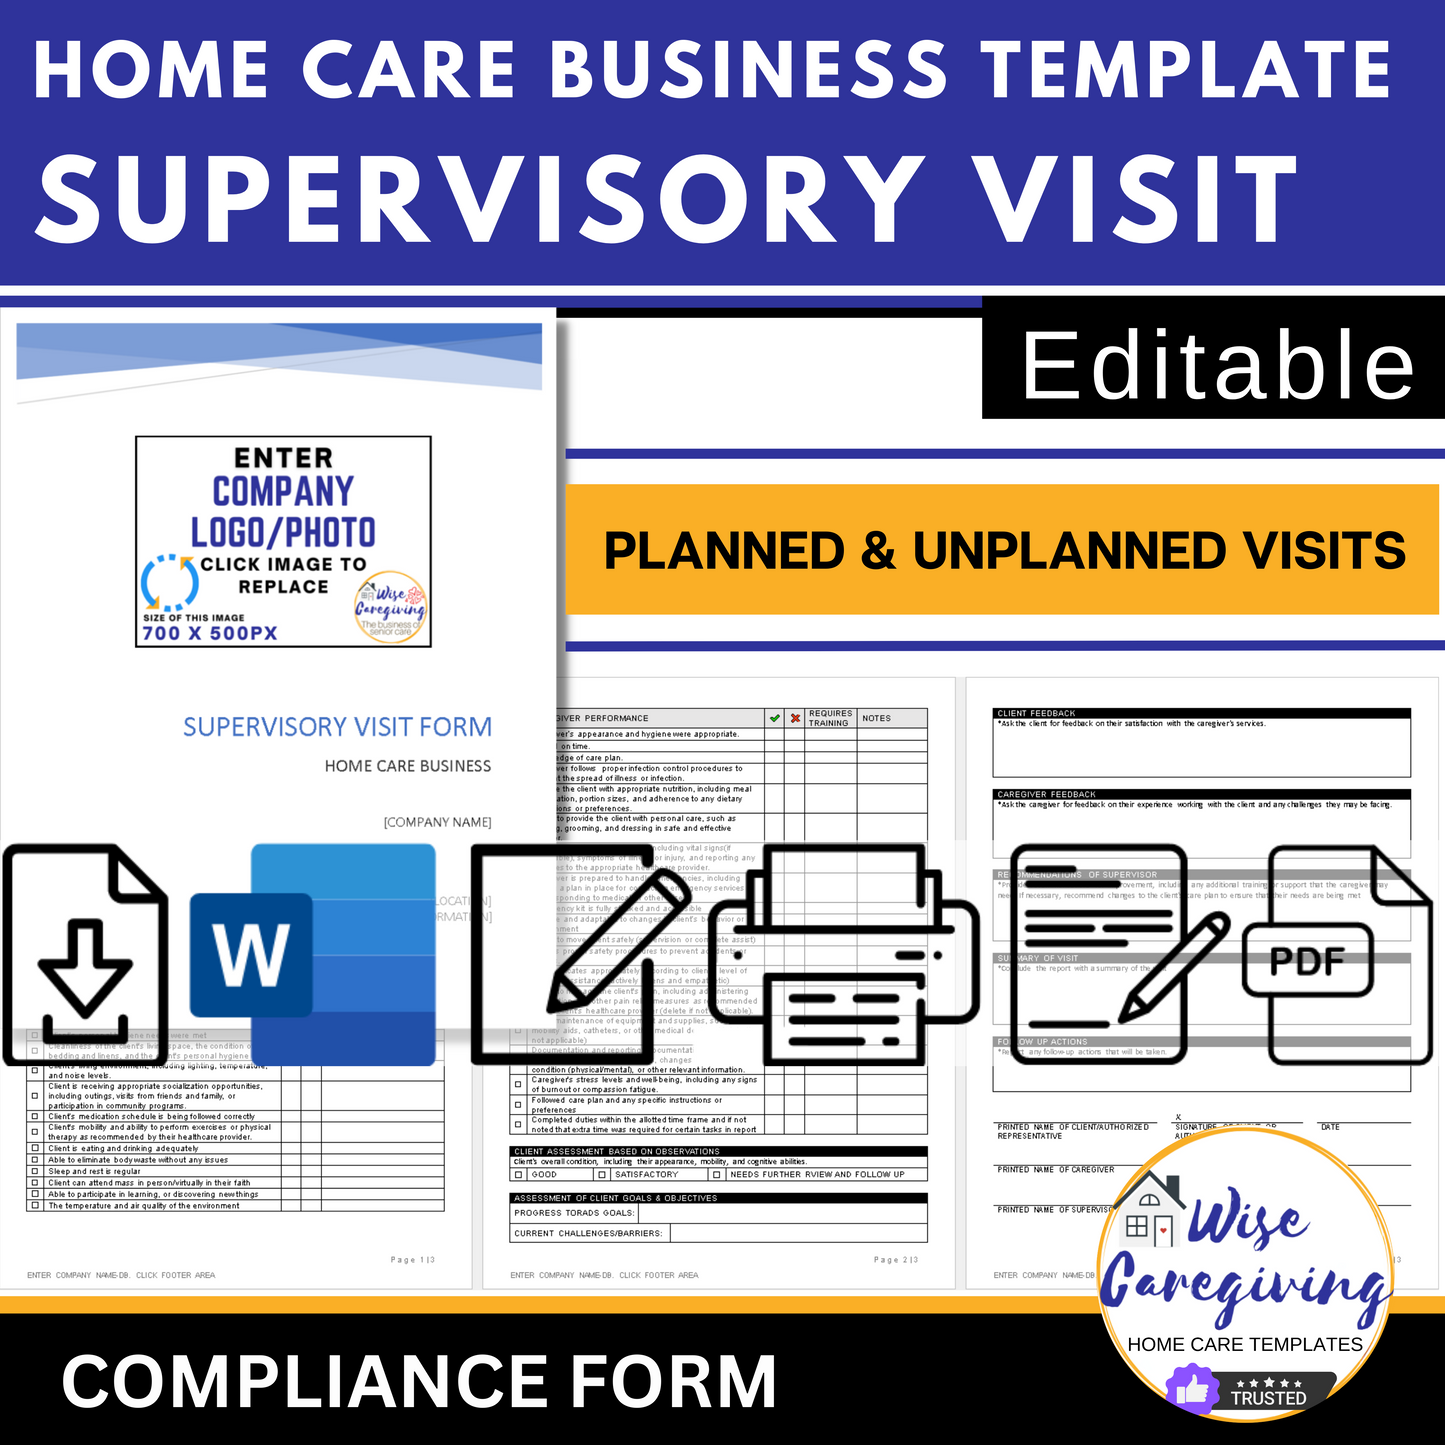 Home Care Supervisory Visit Form Template